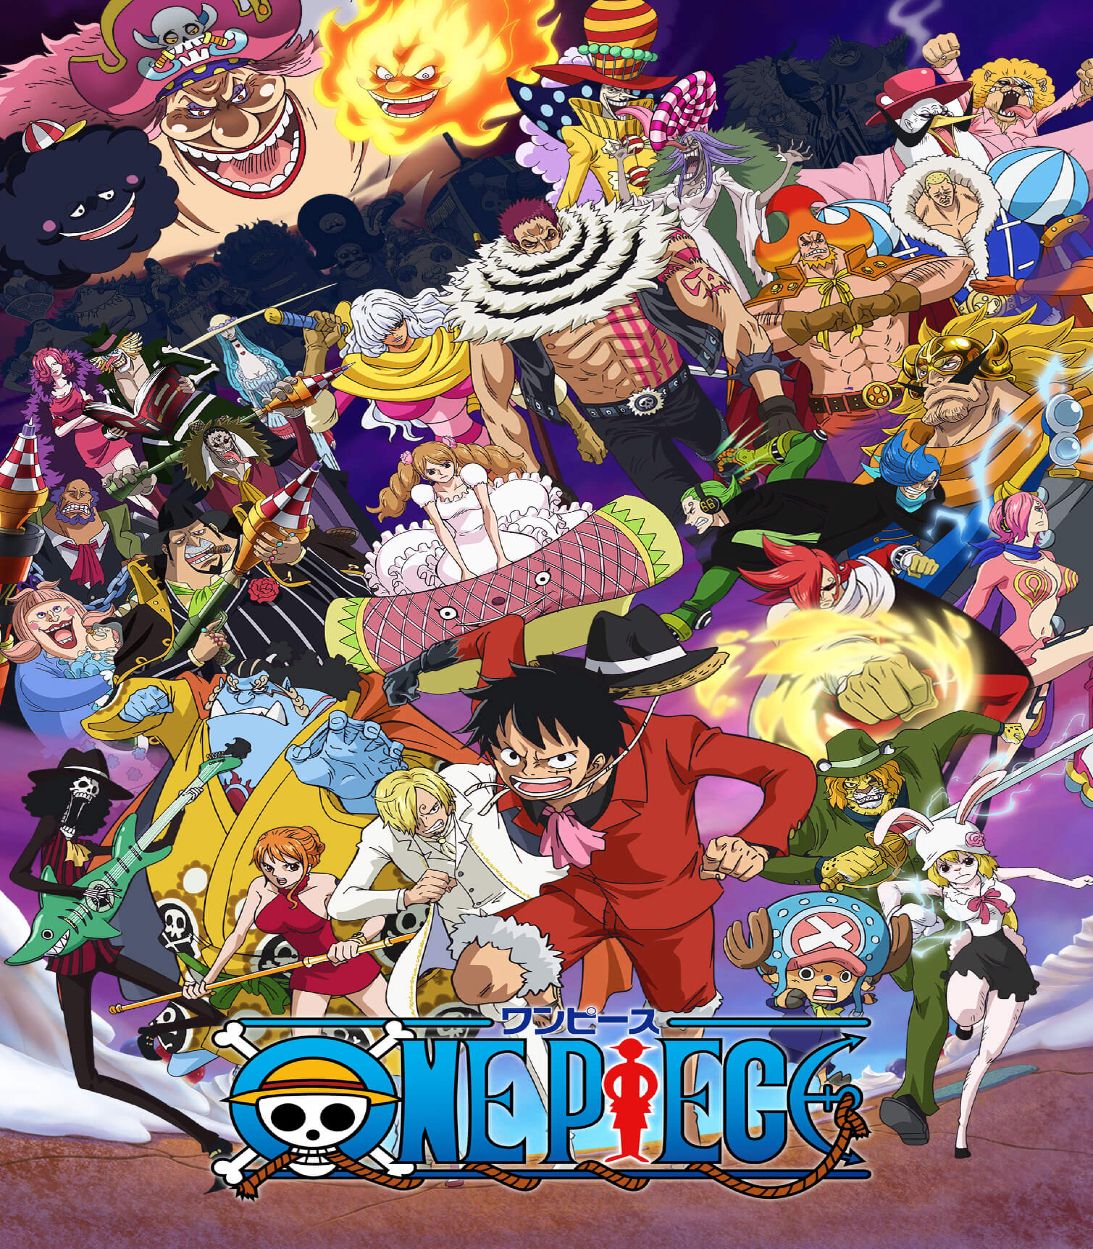 The cast of One Piece run together